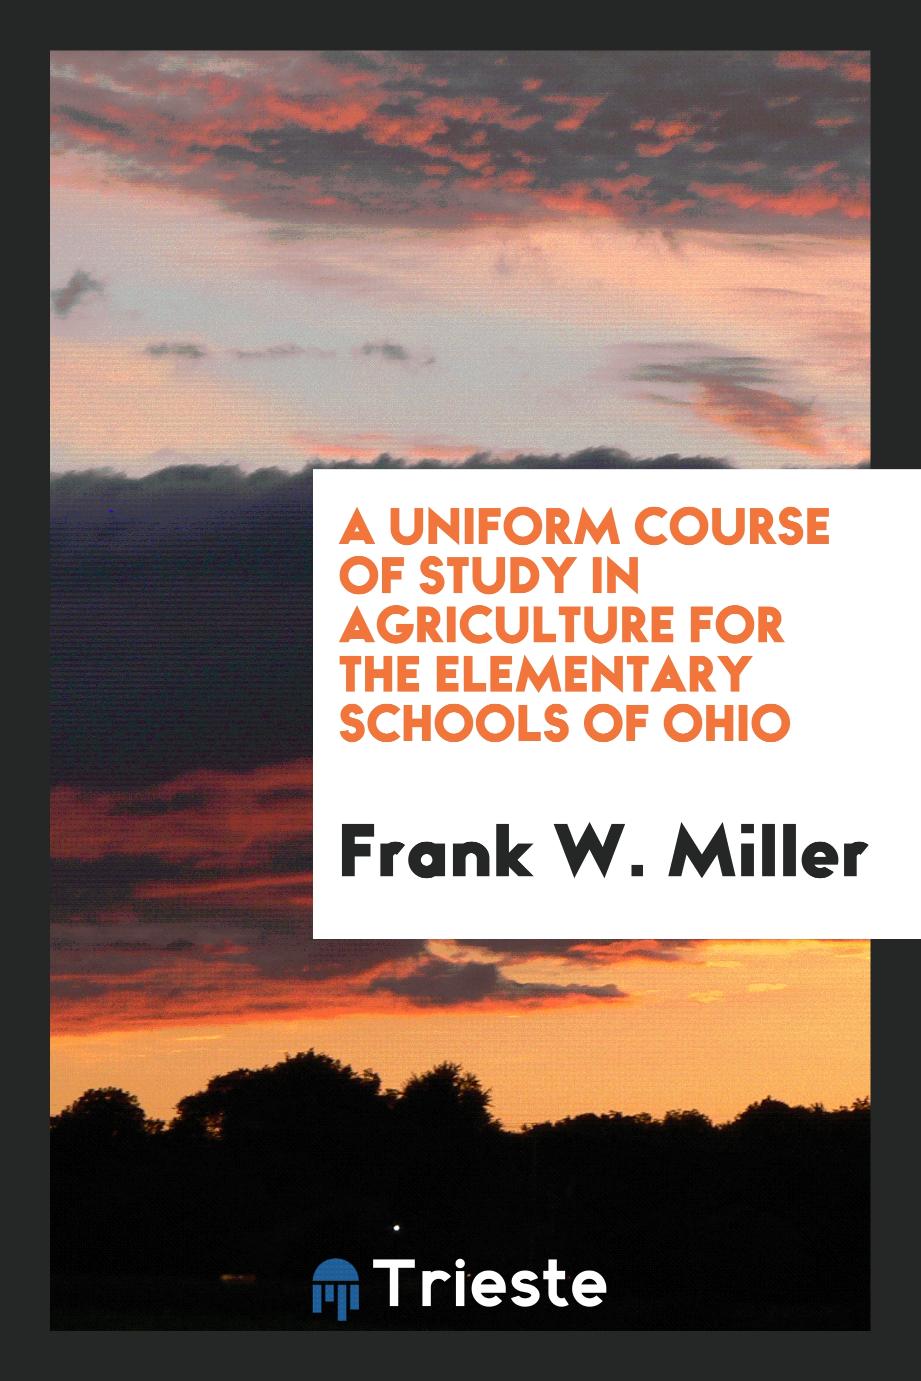 A Uniform Course of Study in Agriculture for the Elementary Schools of Ohio